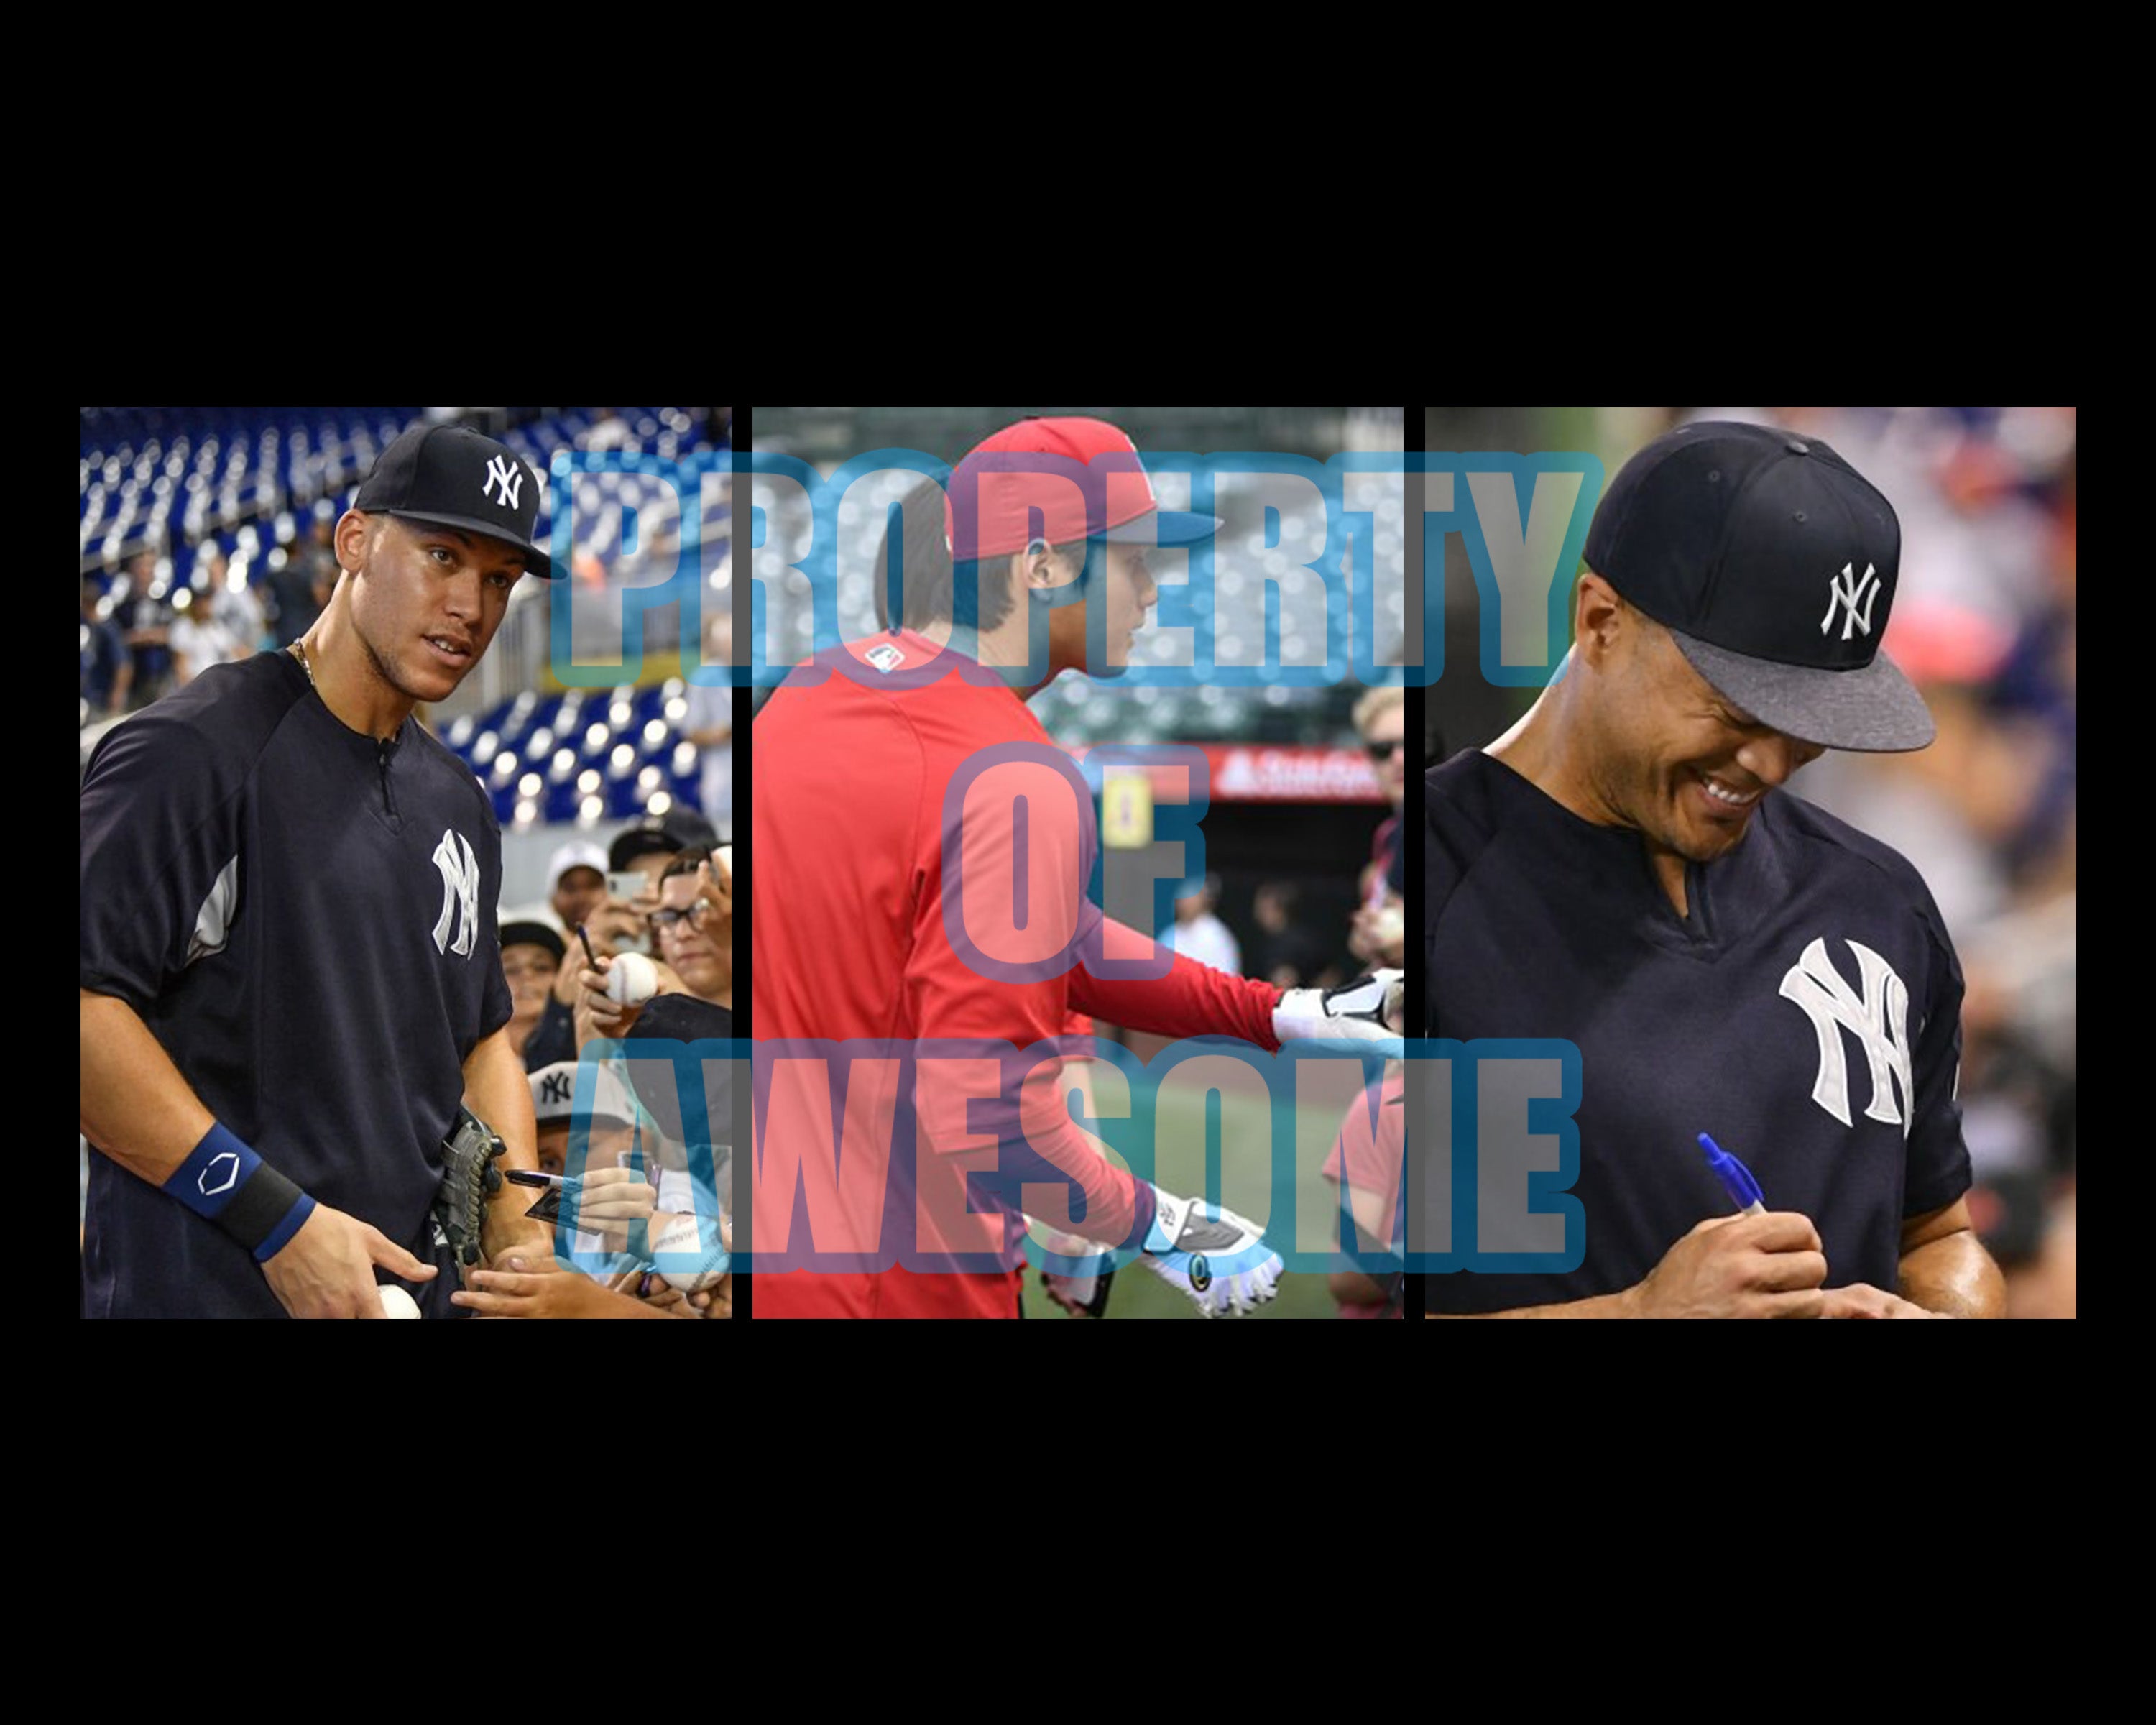 Aaron Judge & Giancarlo Stanton New York Yankees Collage 8x10 Framed Photo  with Engraved Autographs - Dynasty Sports & Framing